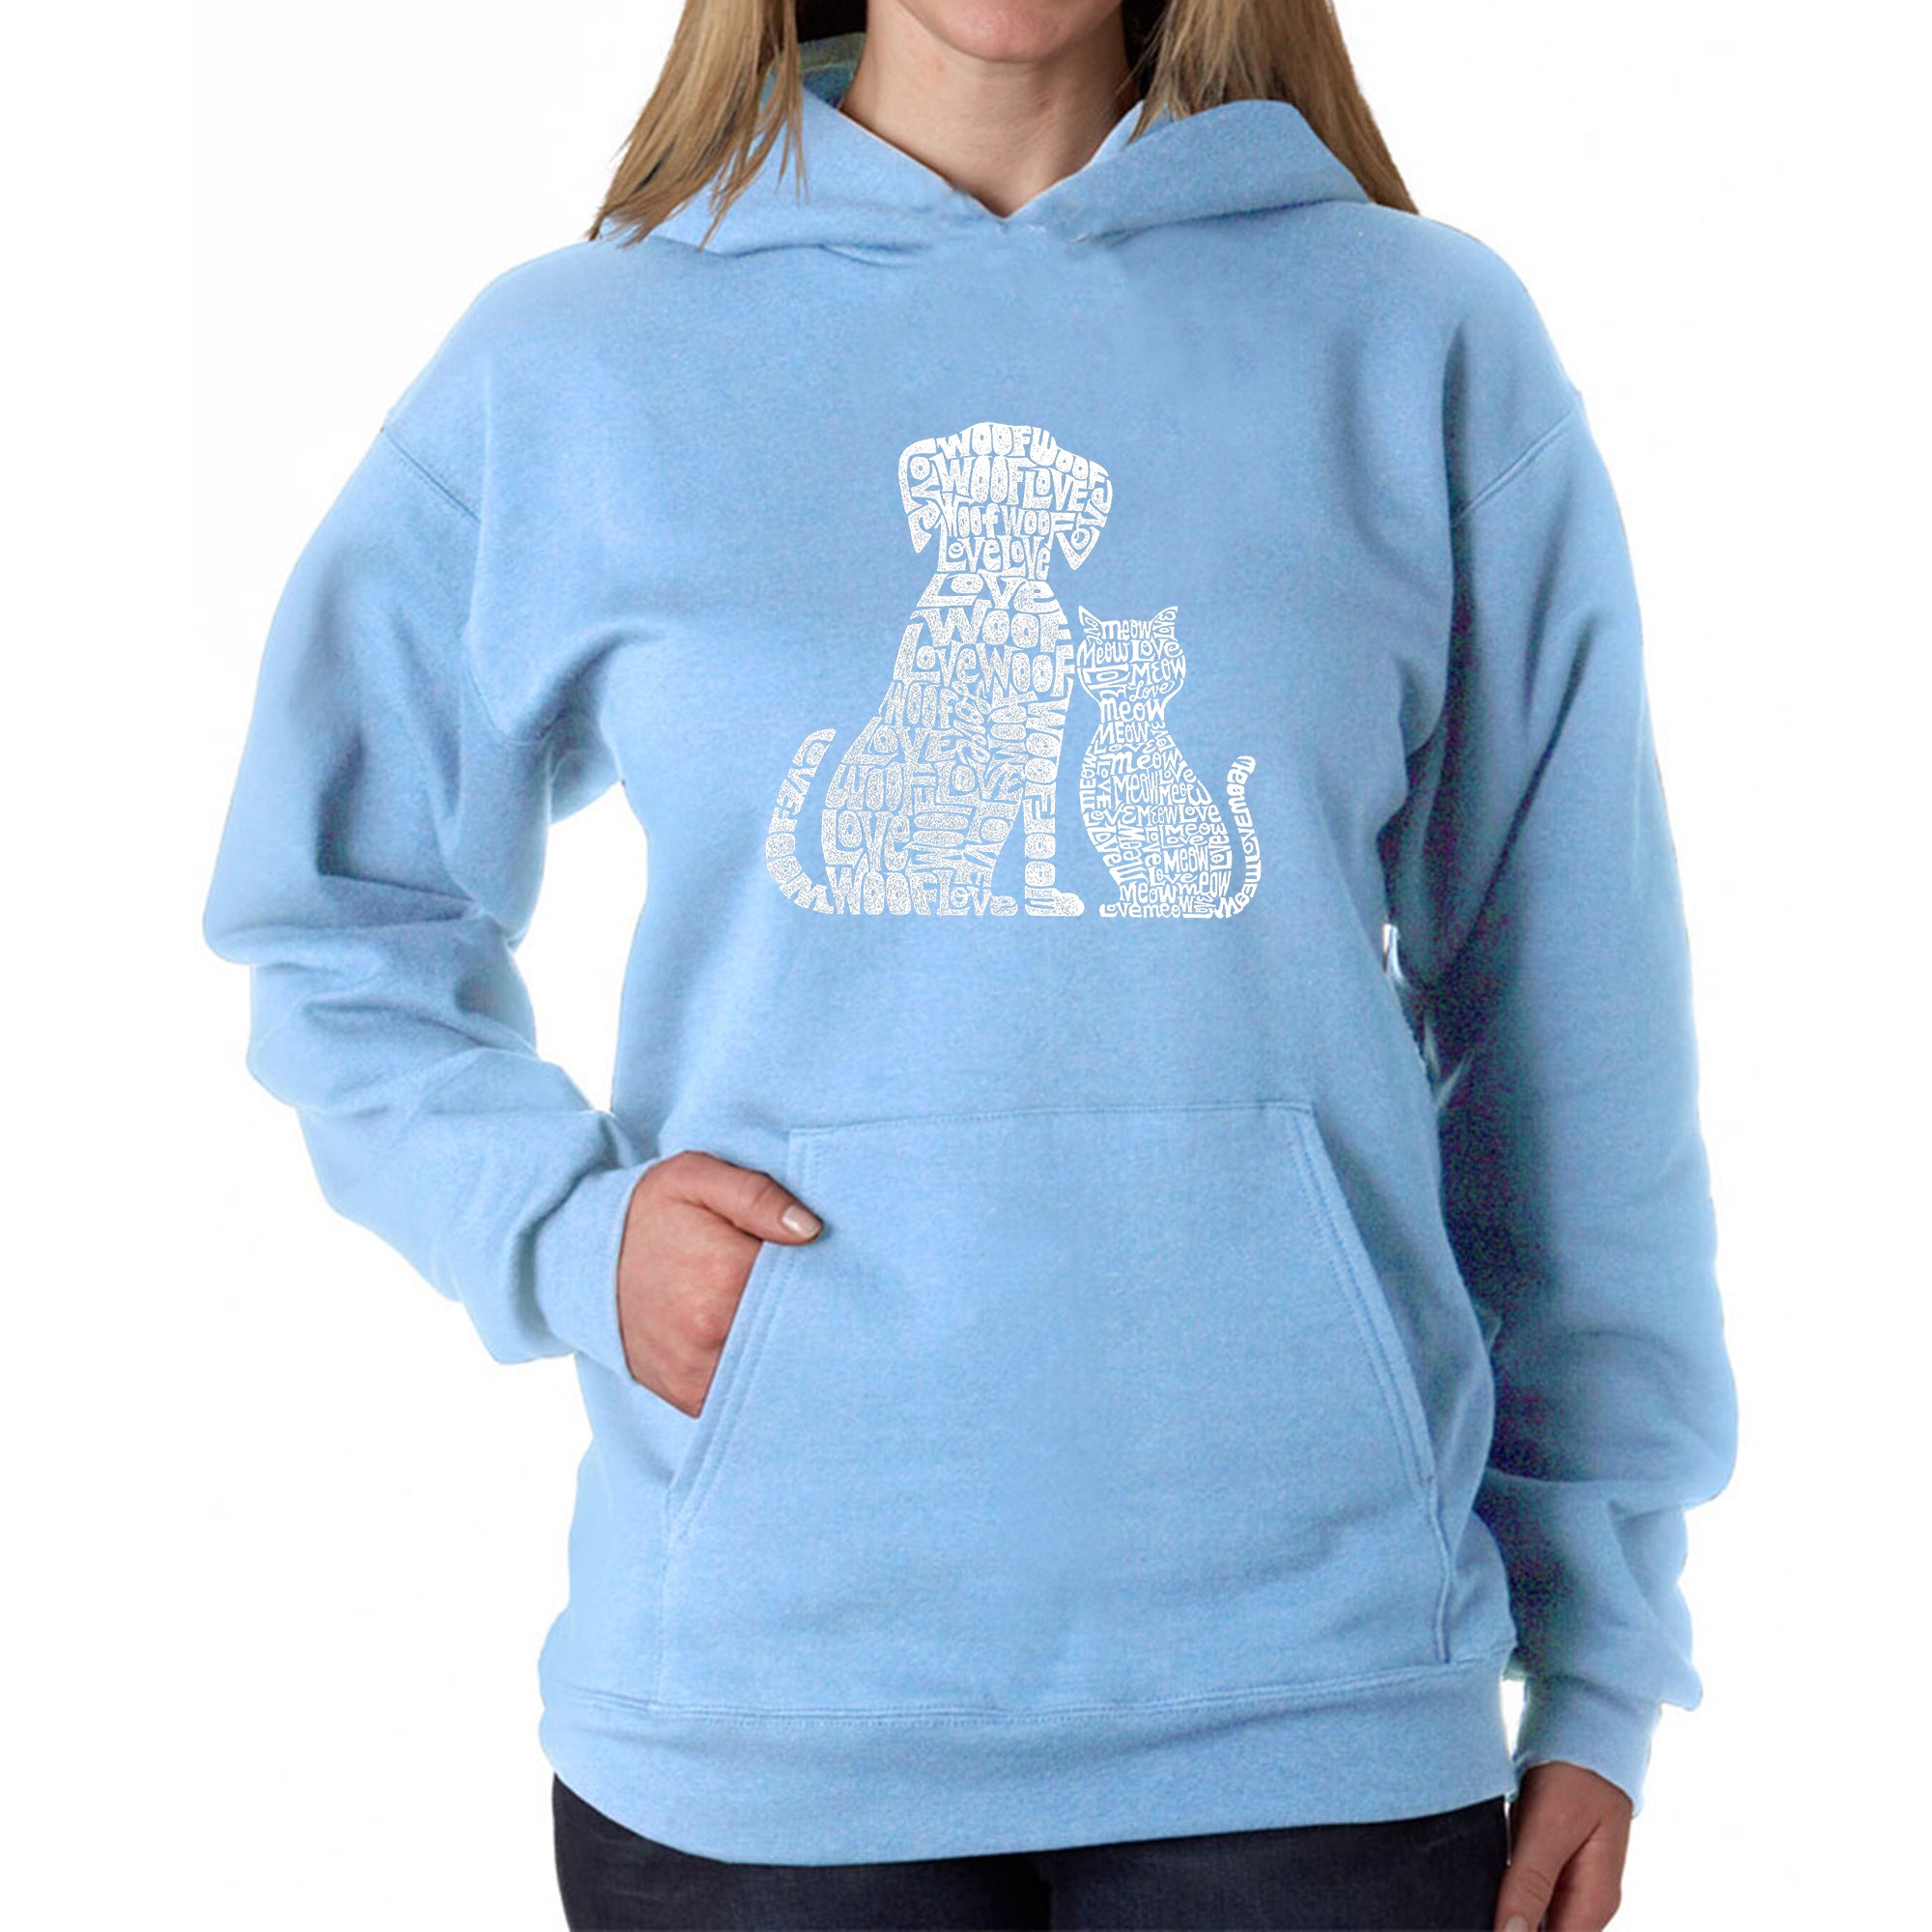 Dogs And Cats - Women's Word Art Hooded Sweatshirt - Blue - XXXX-Large